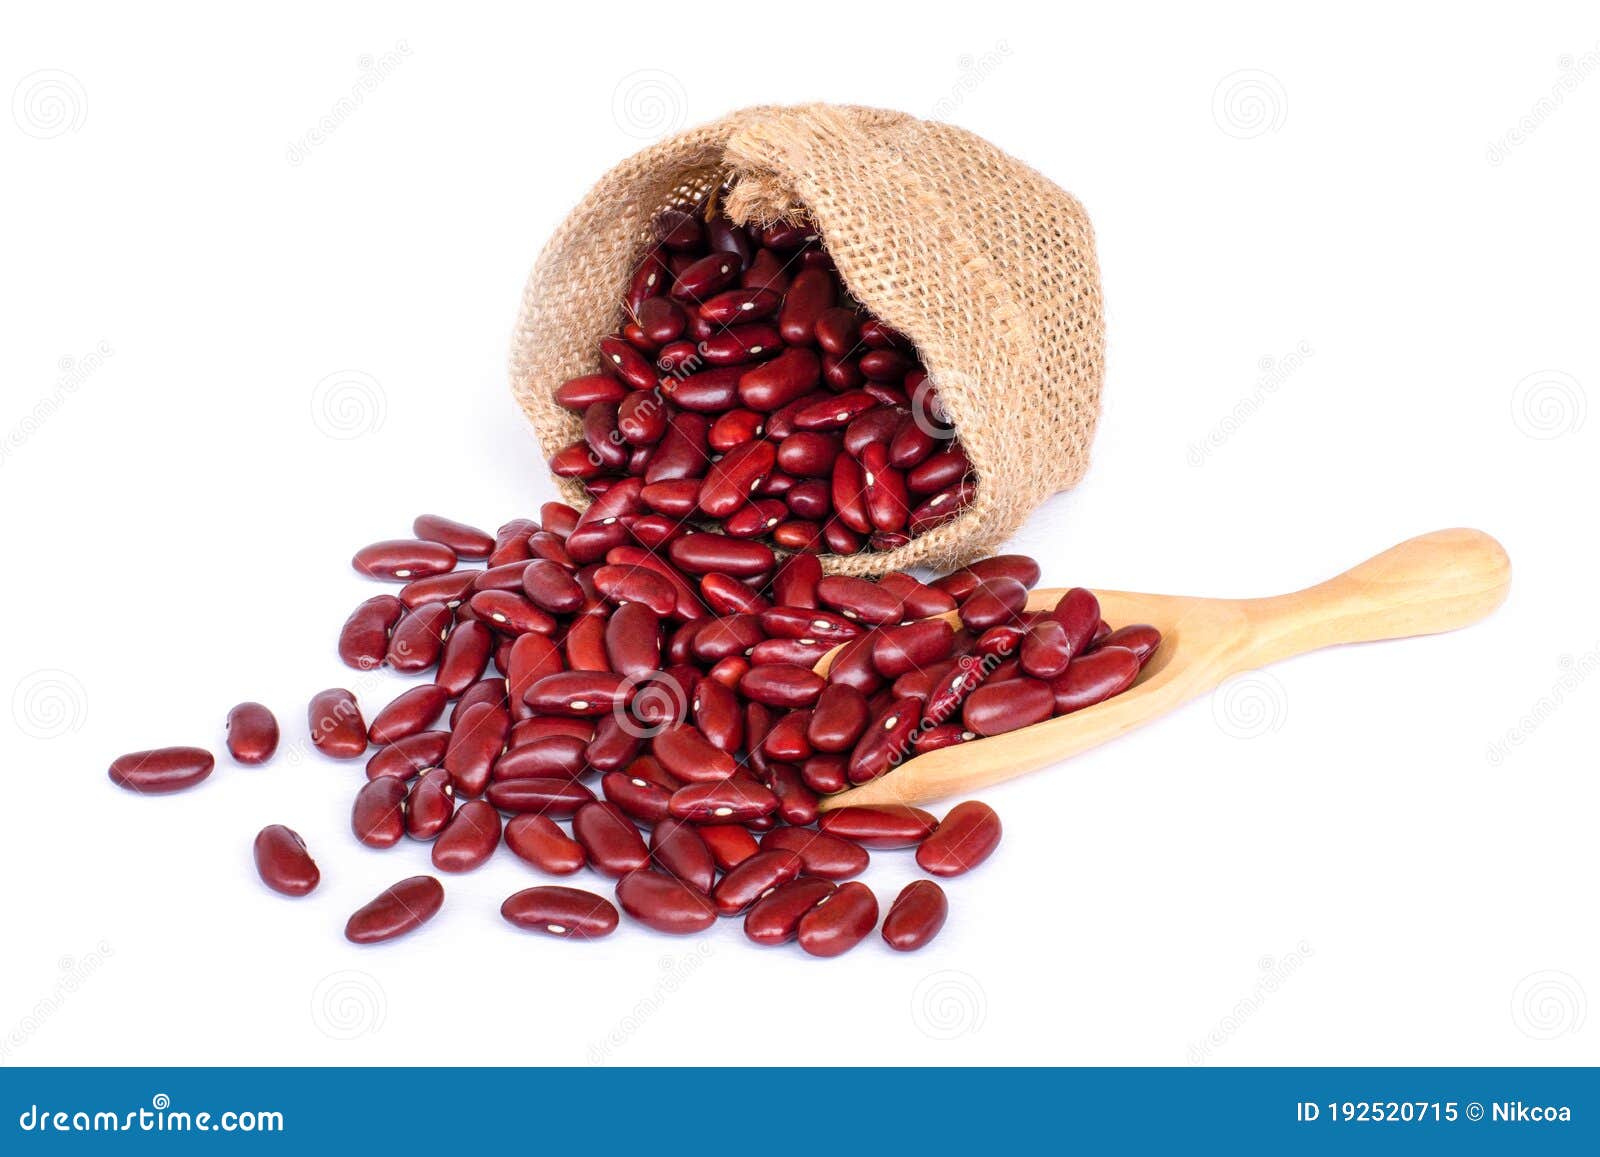 606 Red Kidney Bean Bag Stock Photos - Free & Royalty-Free Stock Photos  from Dreamstime